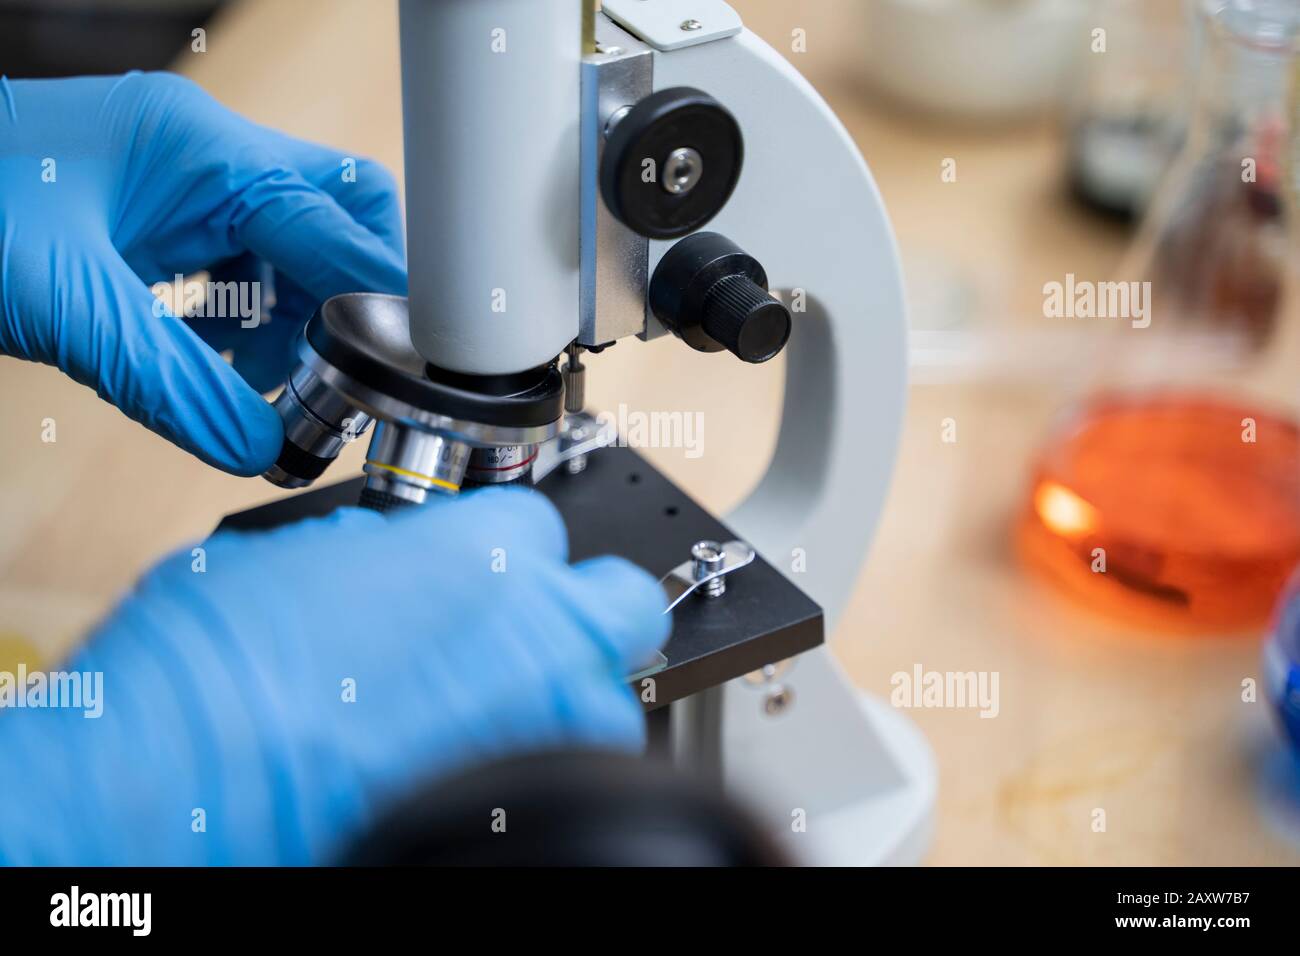 The hands of the analysts are adjusting the microscopes in the lab. Stock Photo